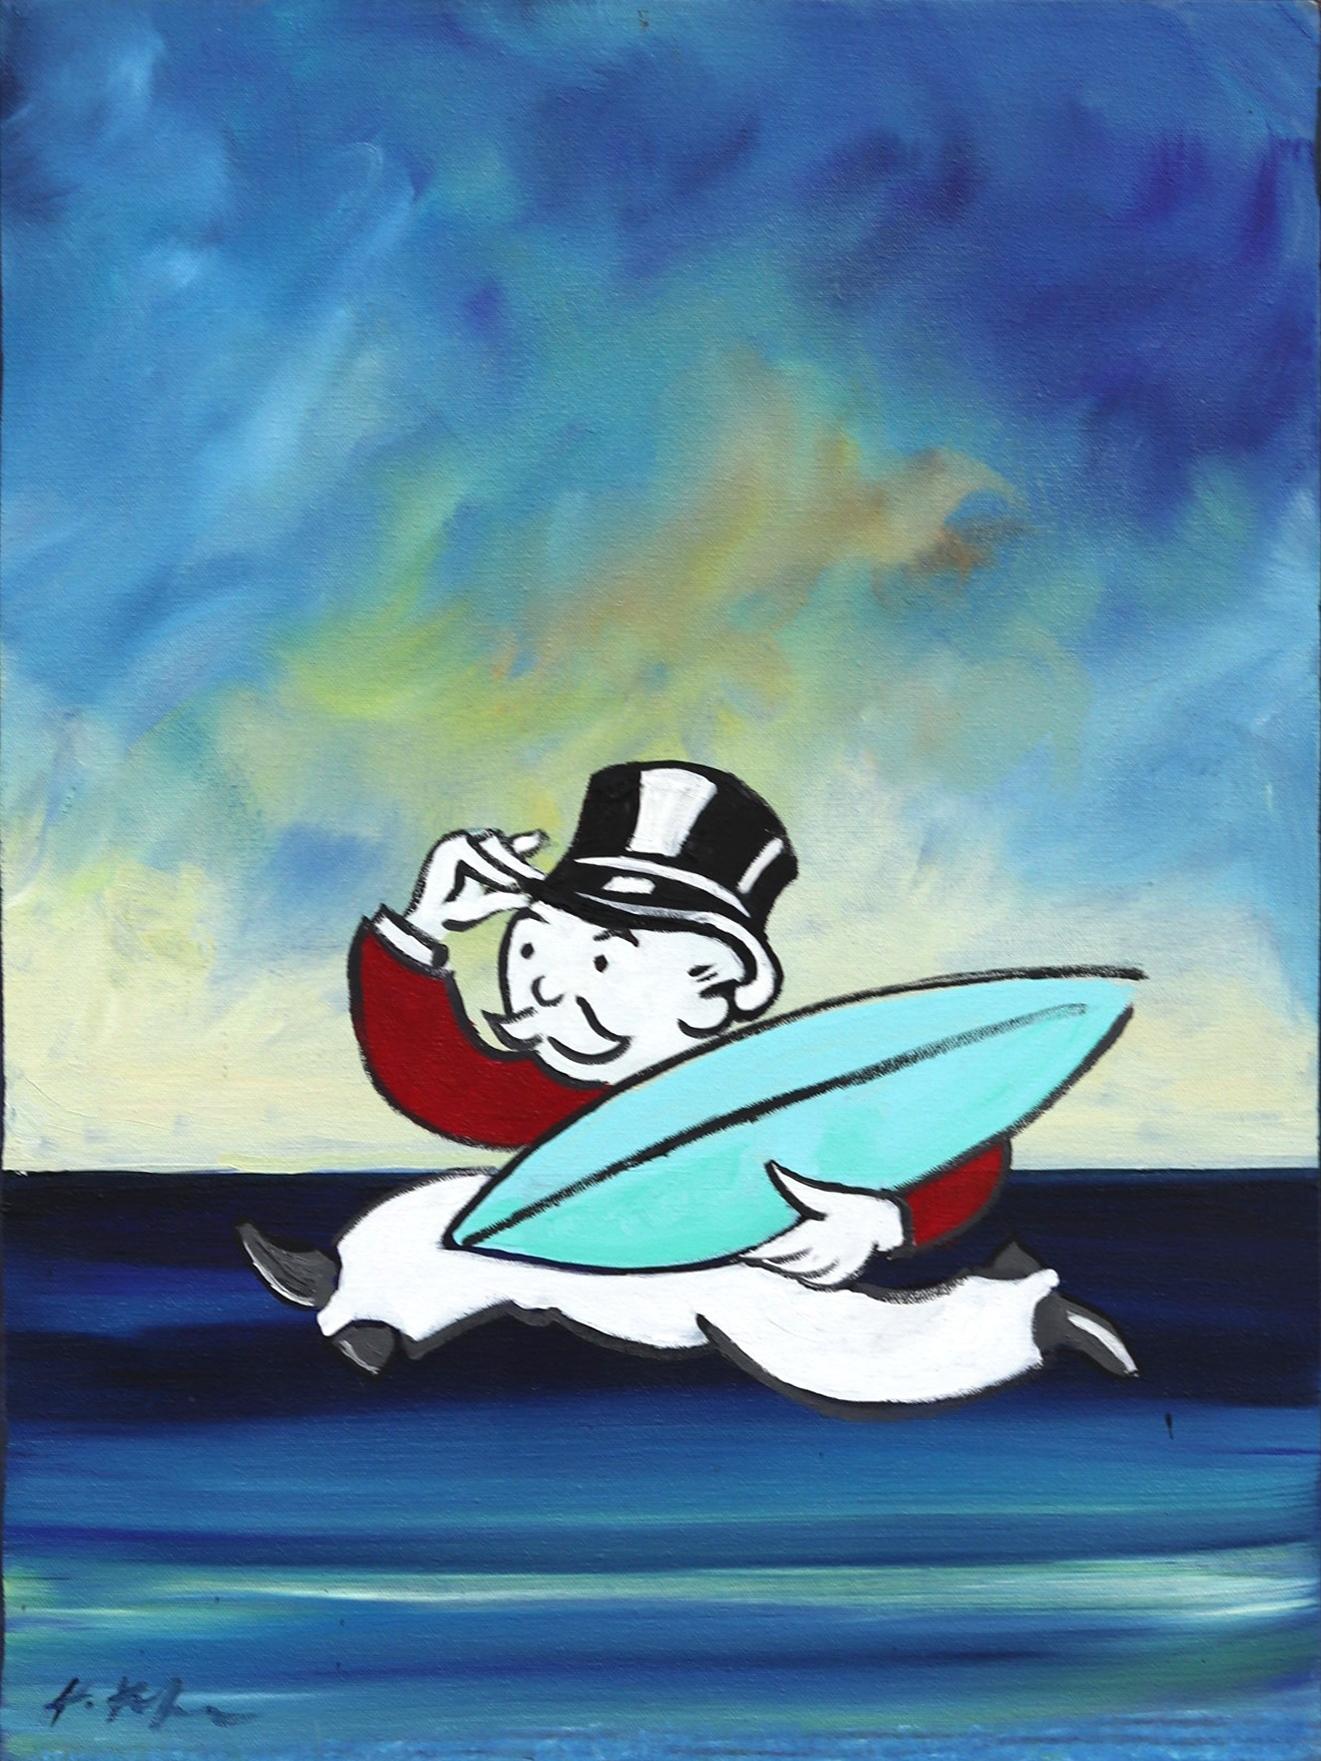 Let's Go Surfing Uncle Pennybags!